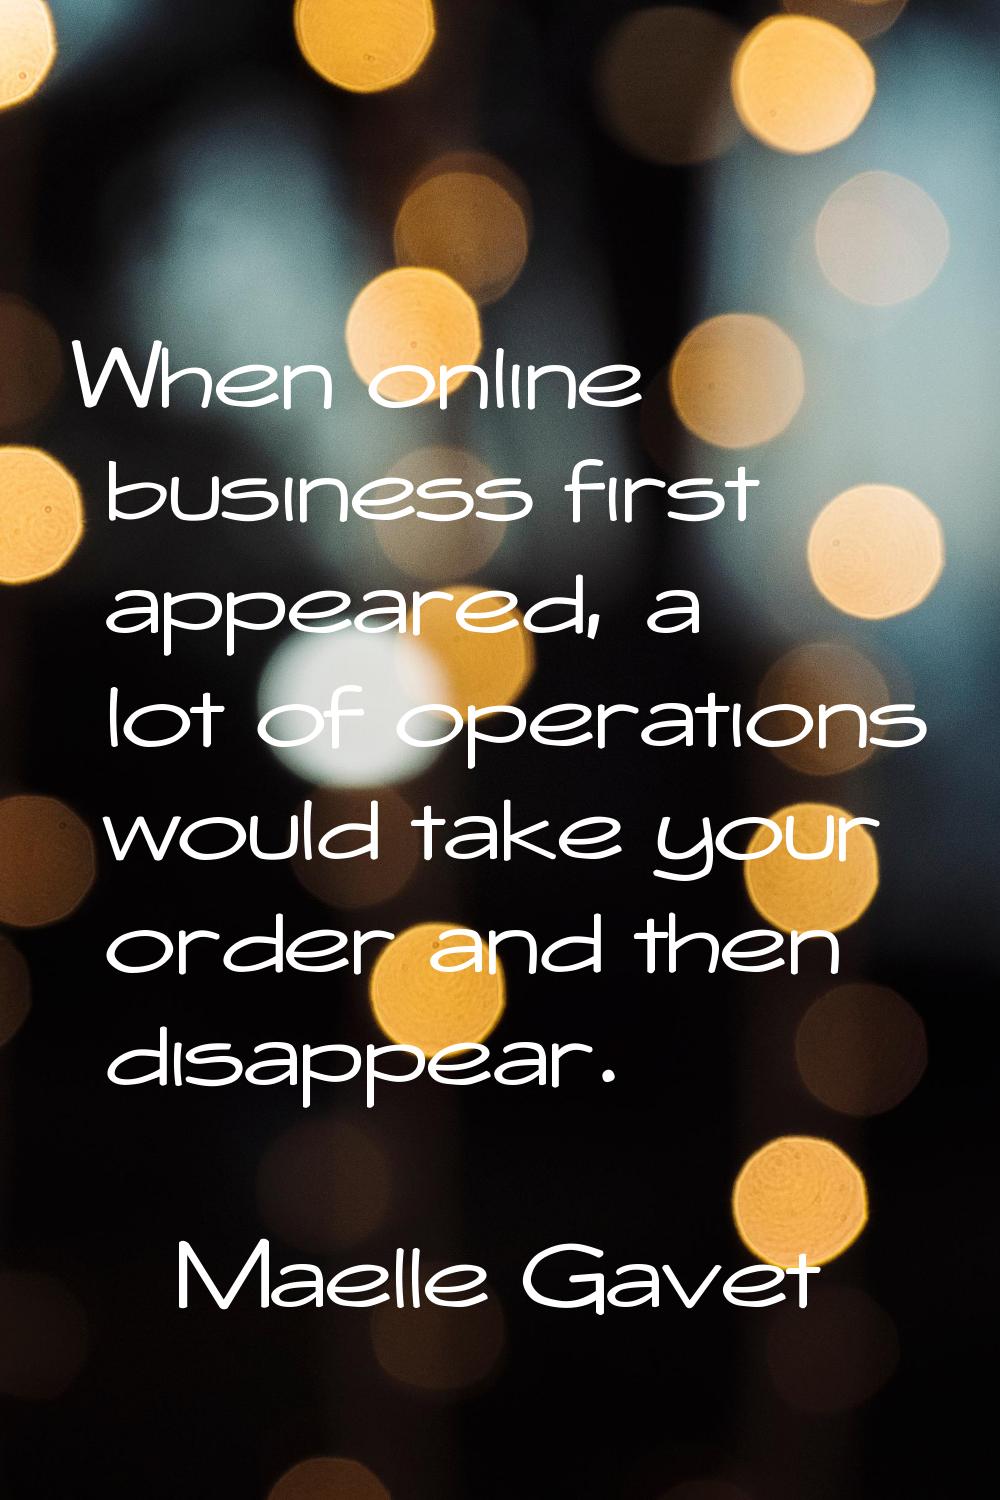 When online business first appeared, a lot of operations would take your order and then disappear.